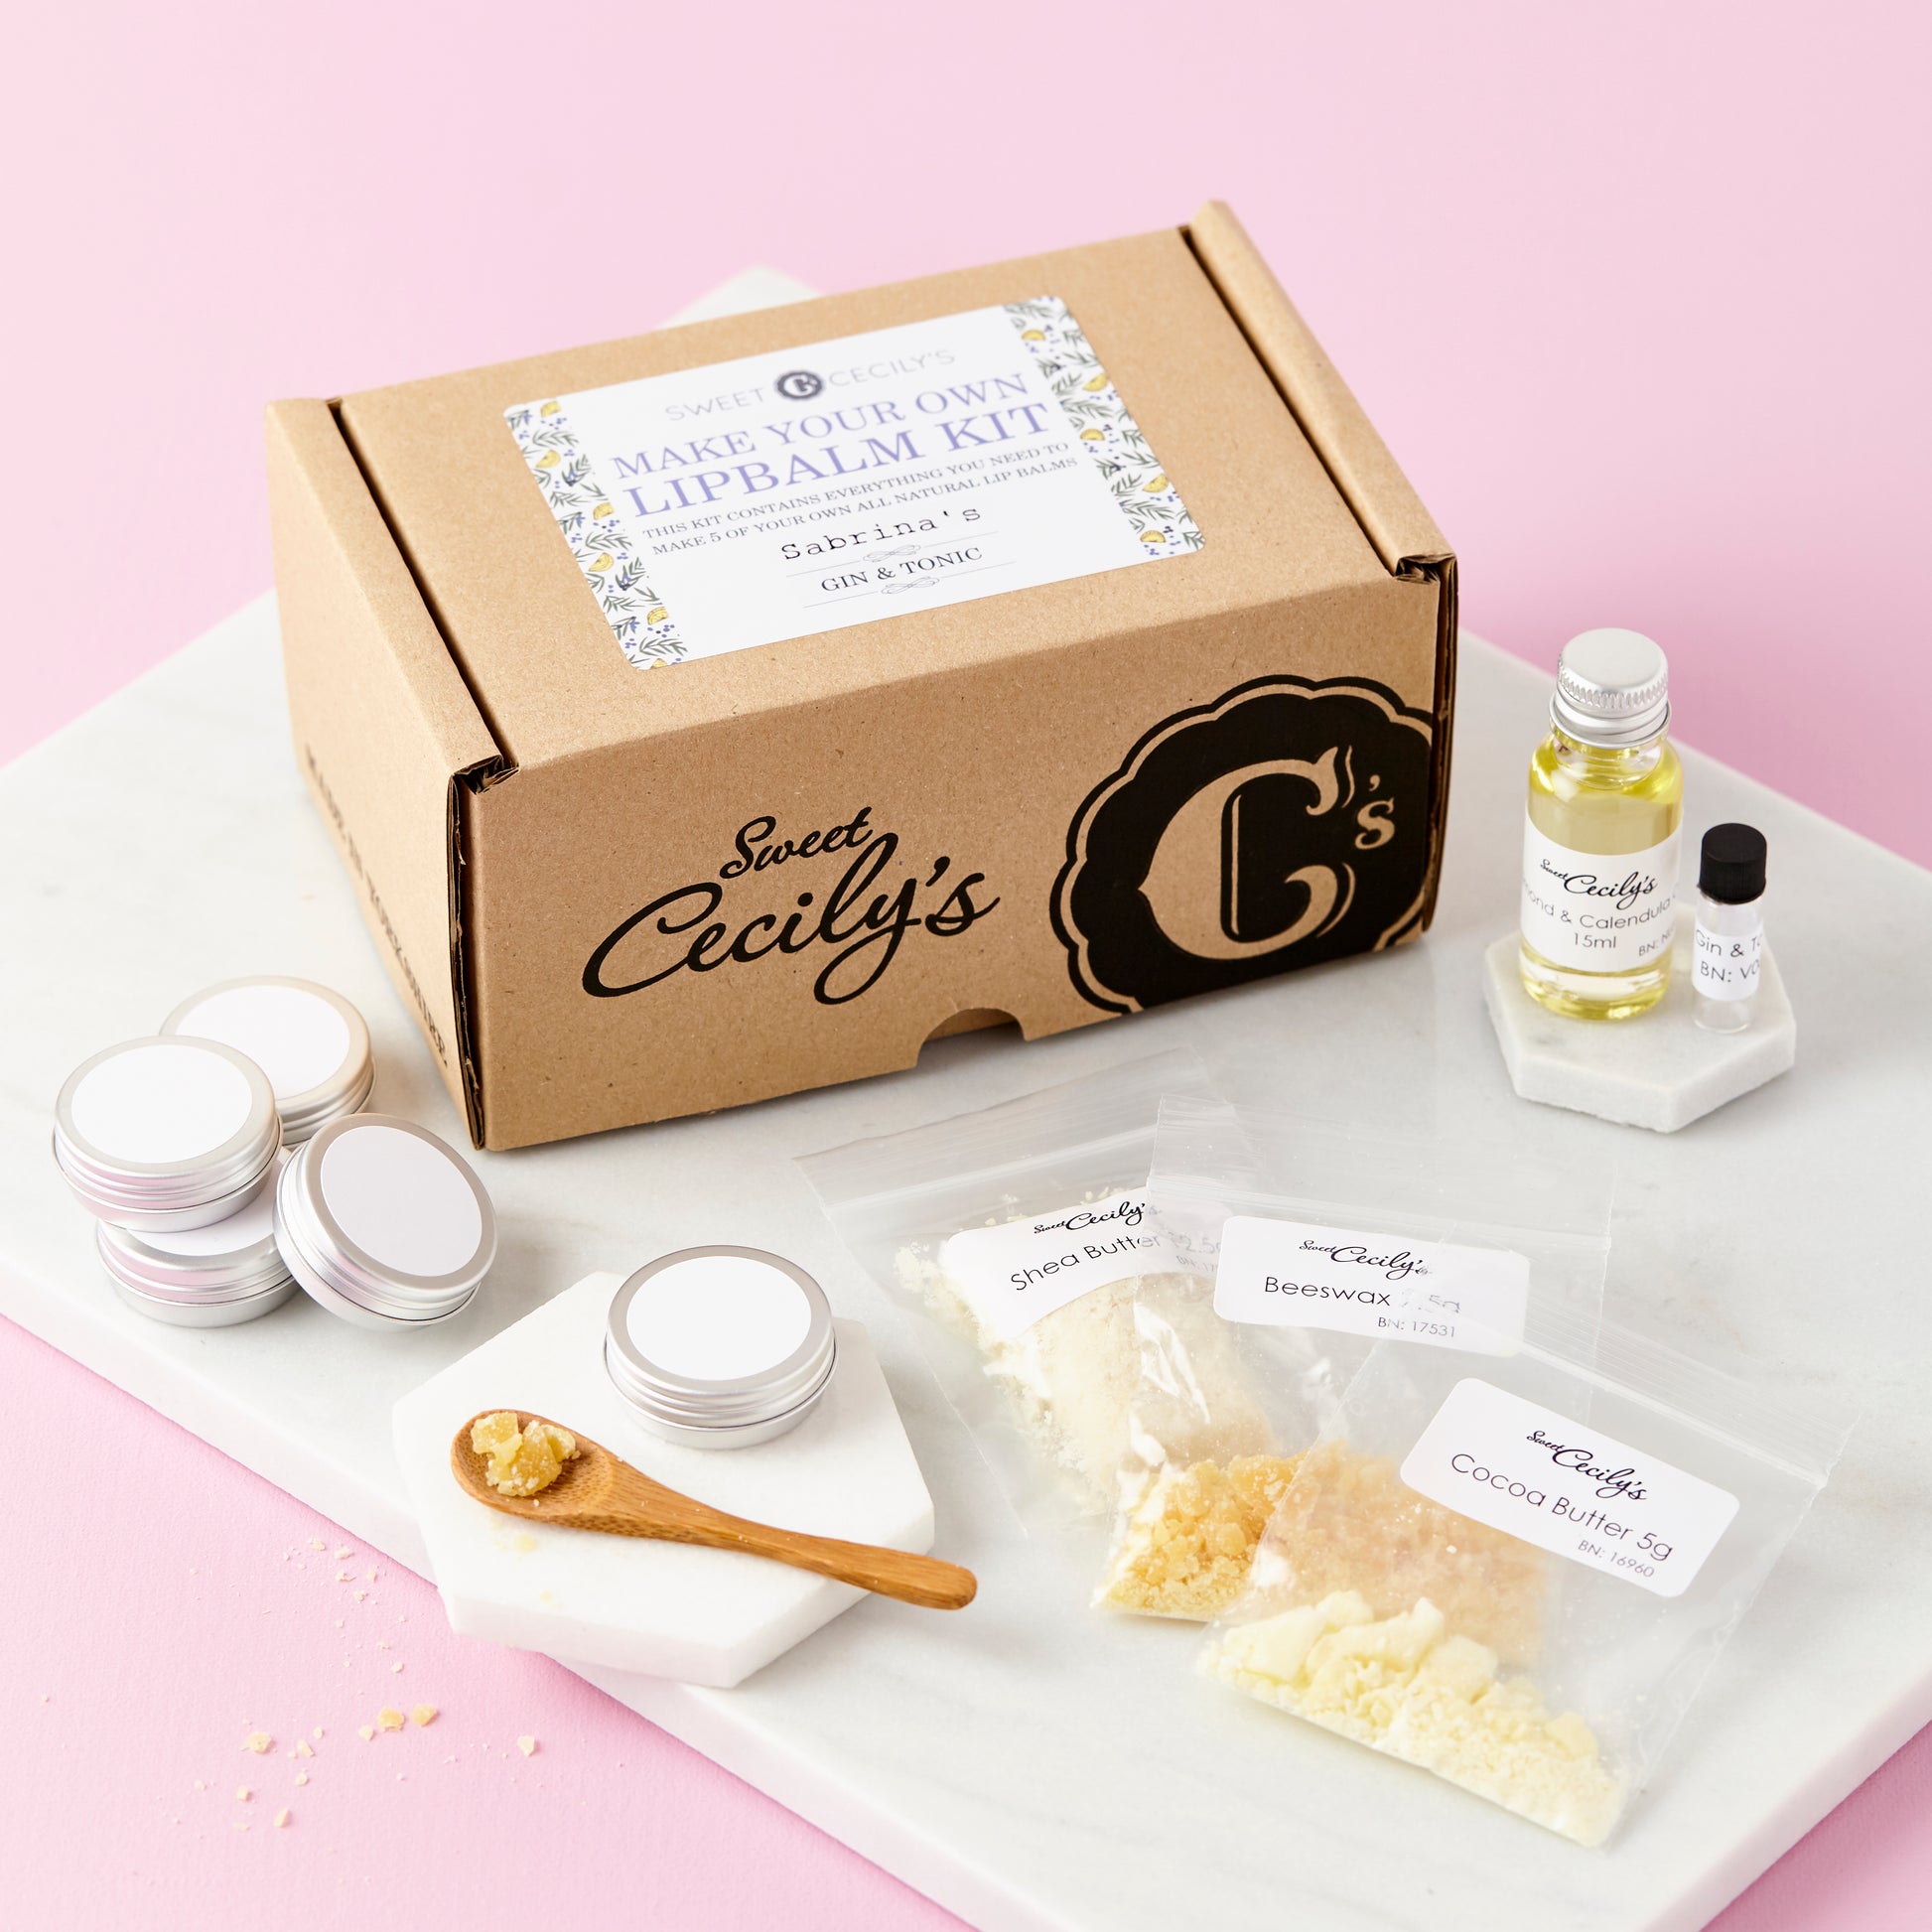 Make Your Own Lip Balm Kit - Gin & Tonic Flavour – Sweet Cecily's